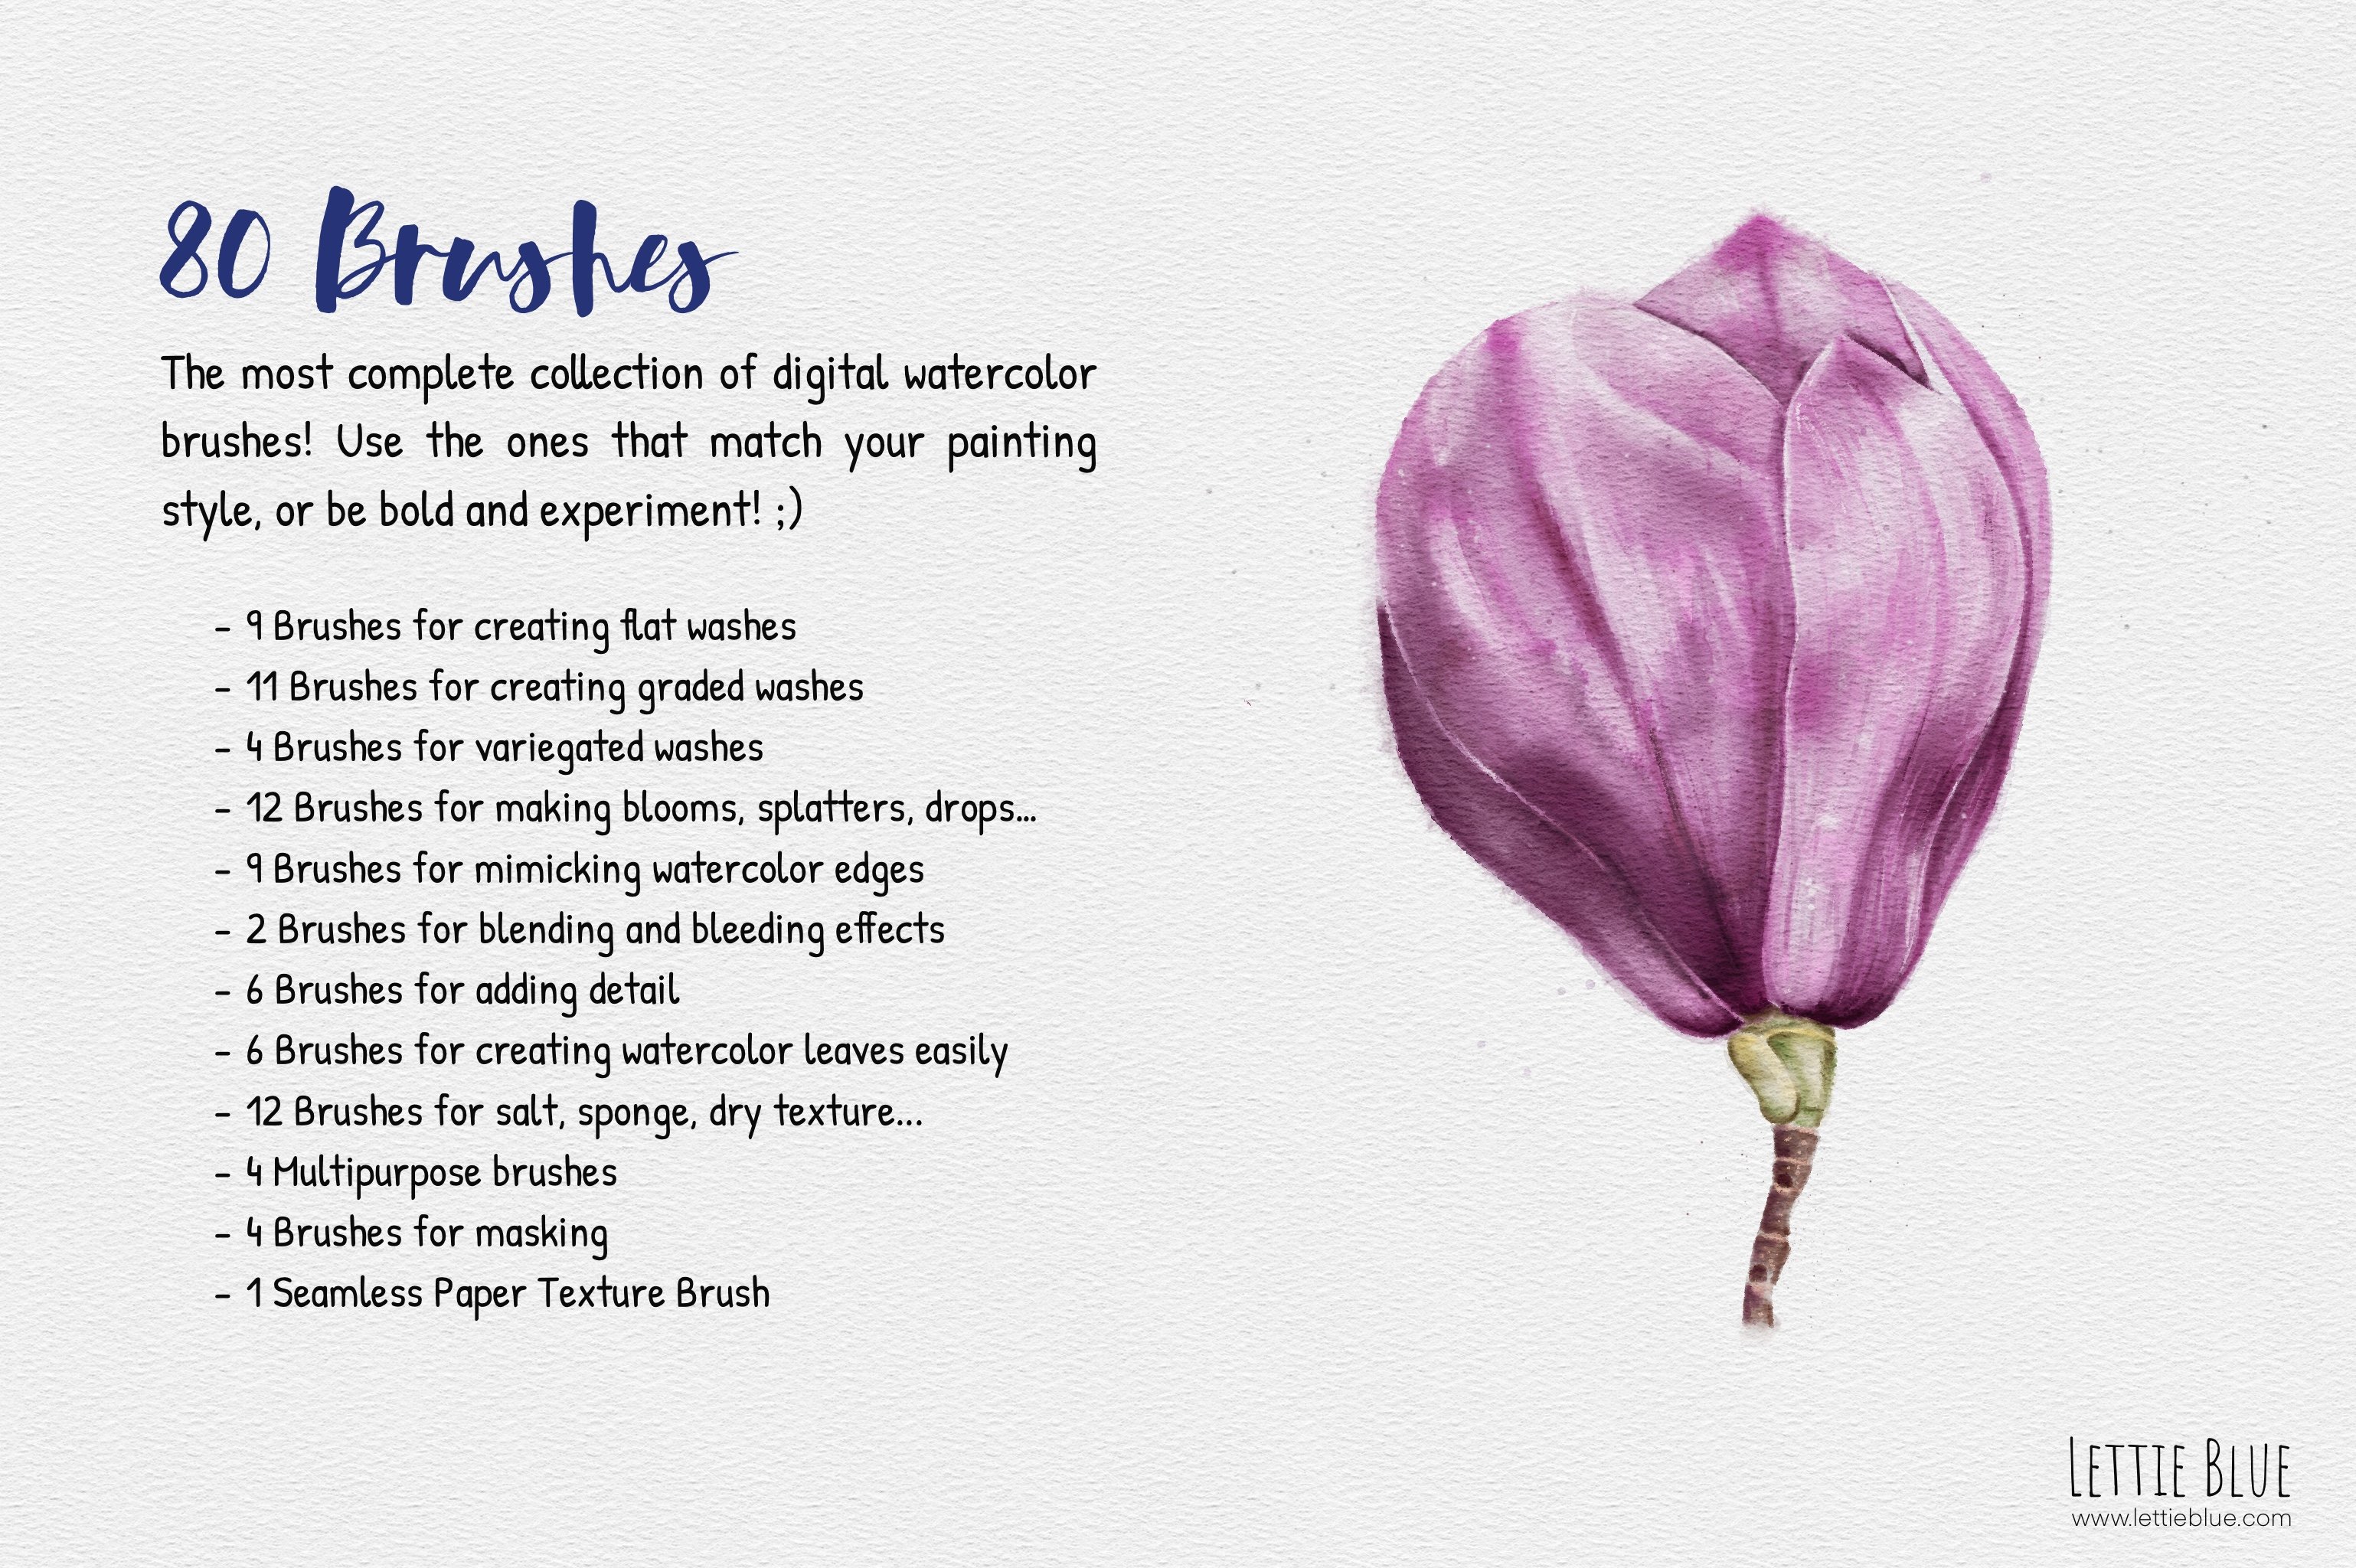 79 Realistic Watercolor Brushes for Procreate 5